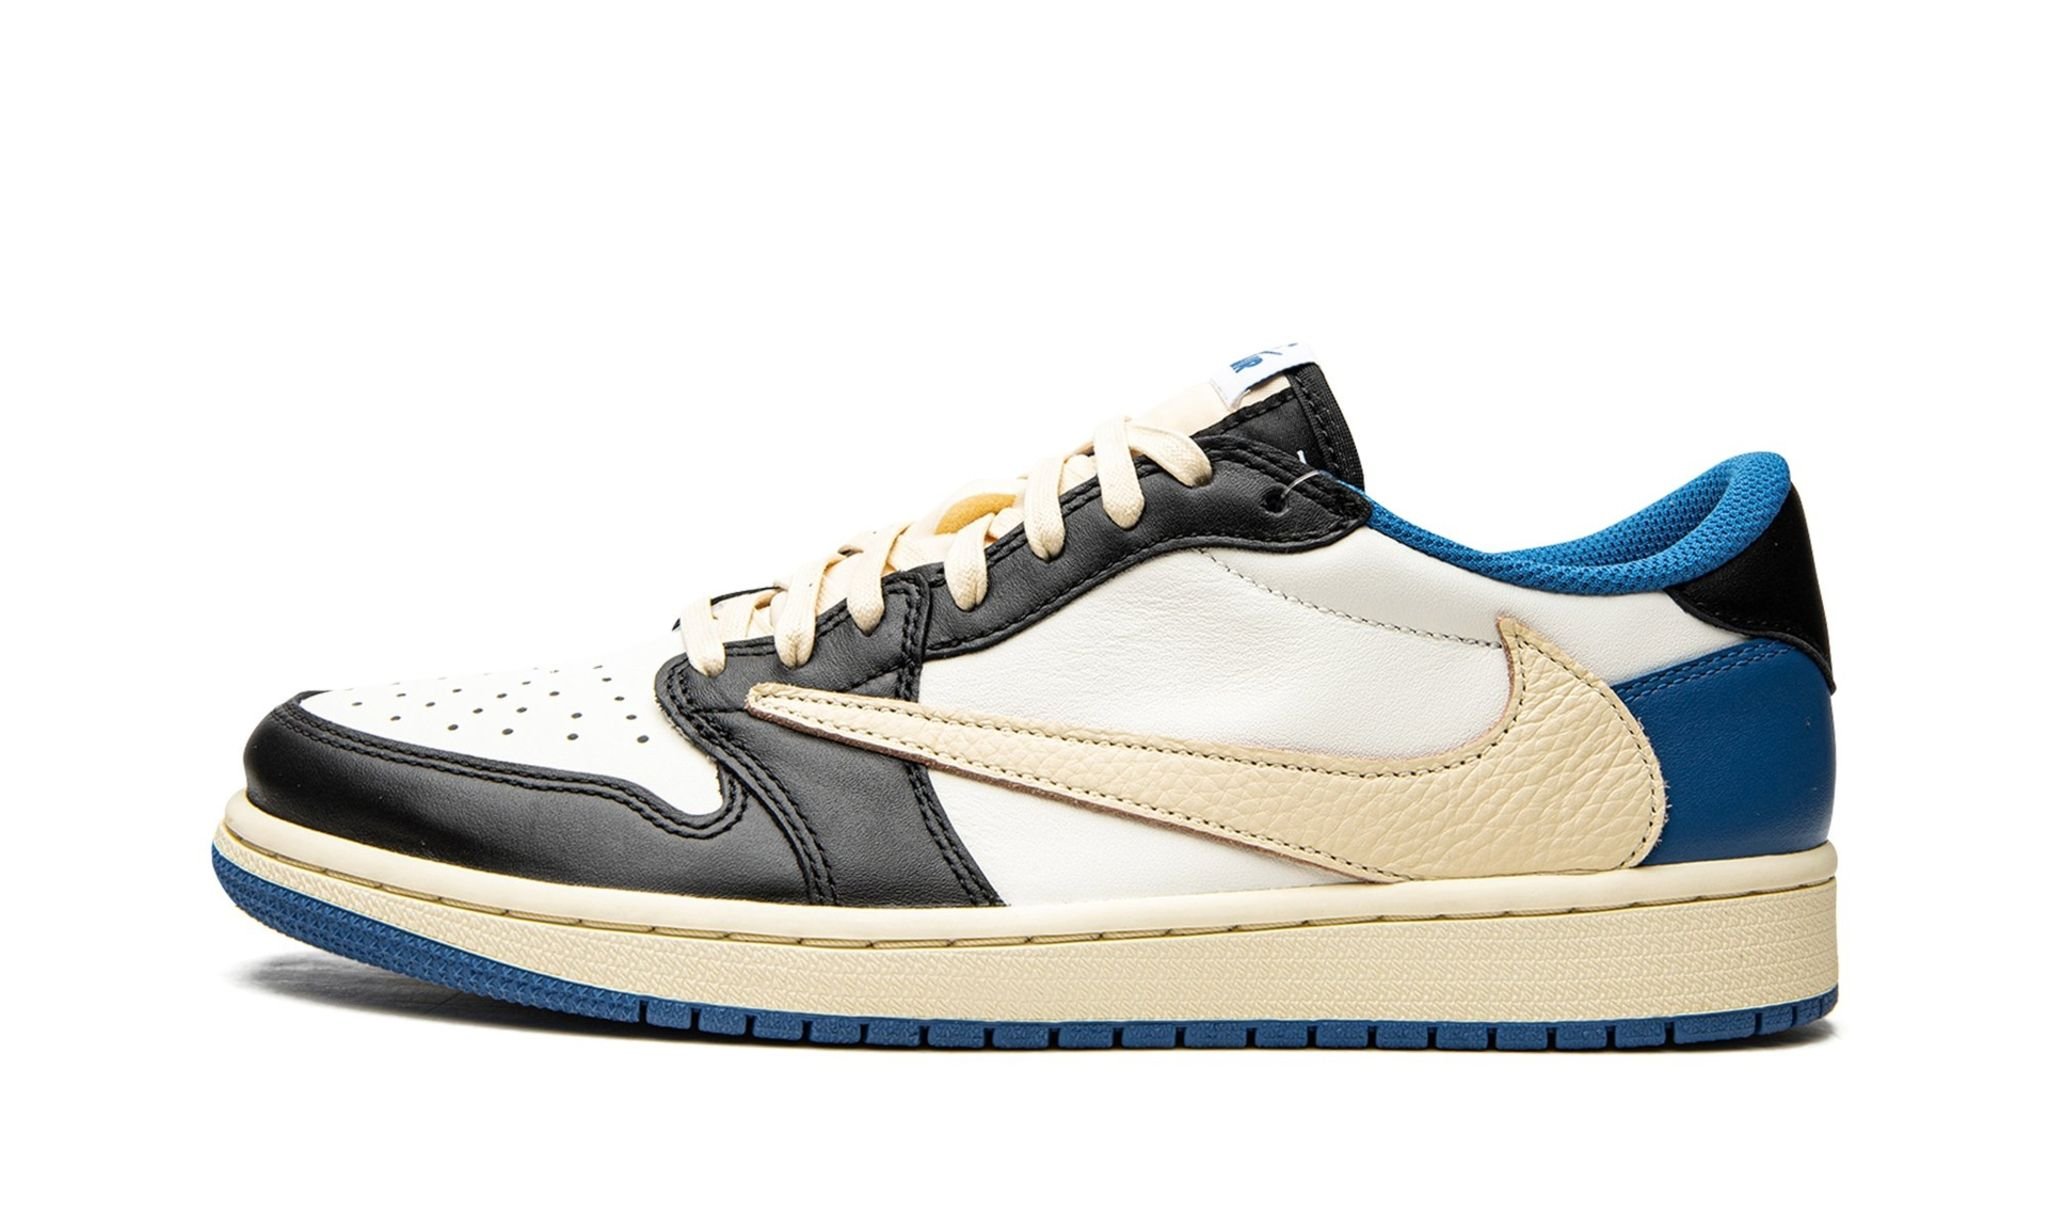 Don't miss out on the sale at Cut Price Air Jordan 1 Low OG SP 